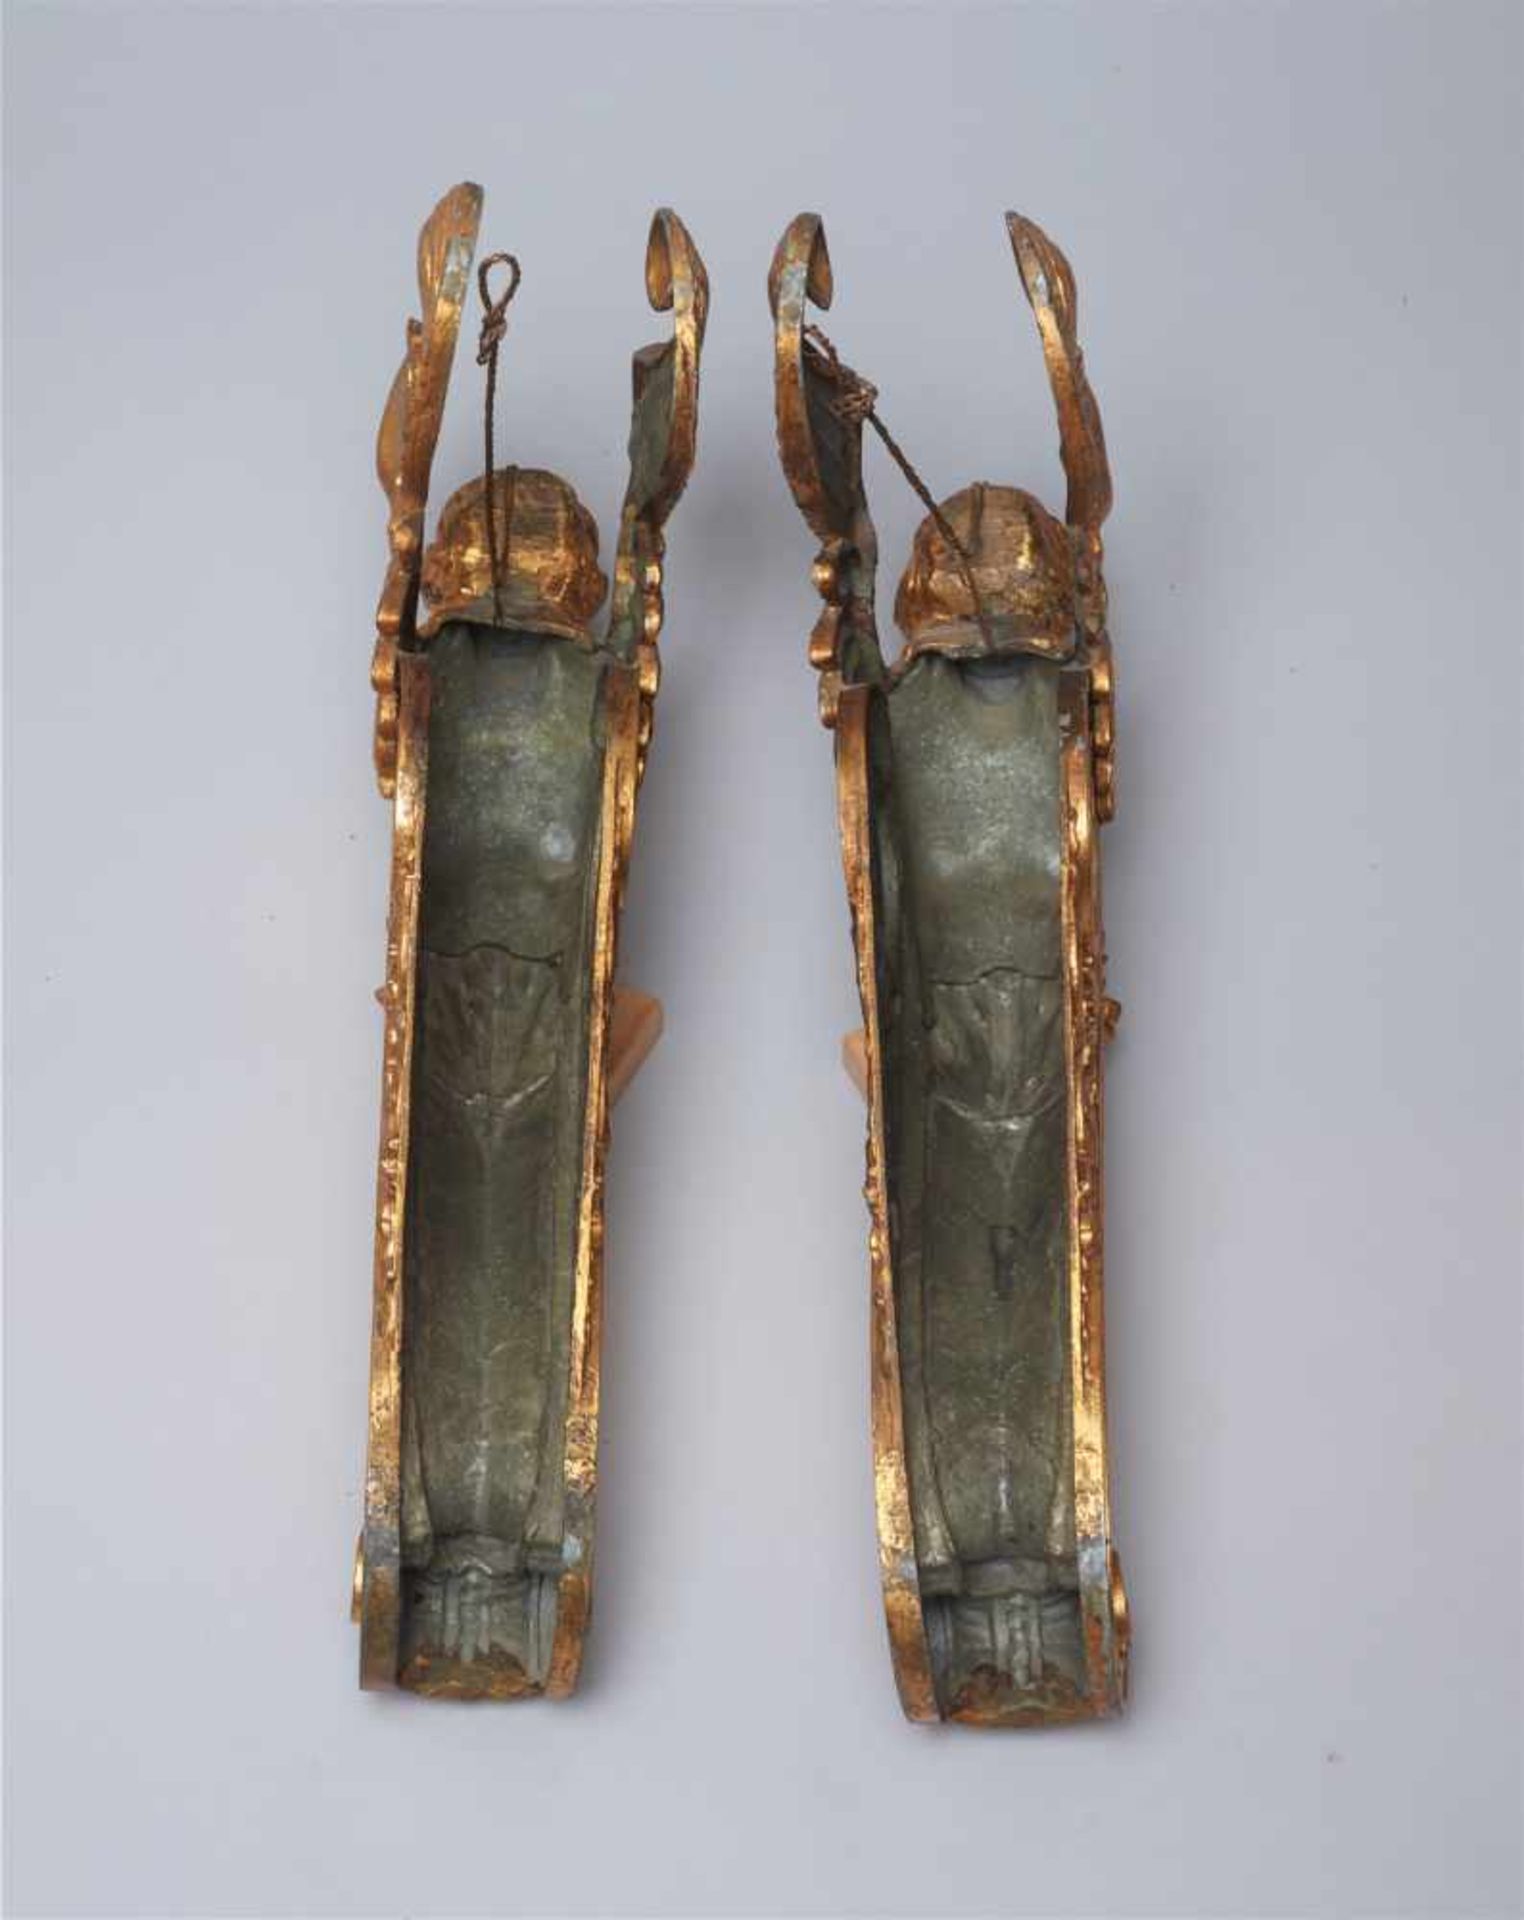 A LARGE VIENNESE PAIR OF 19TH CENTURY GILT CARYATIDSWhite metal with gold lacquer - Image 6 of 6